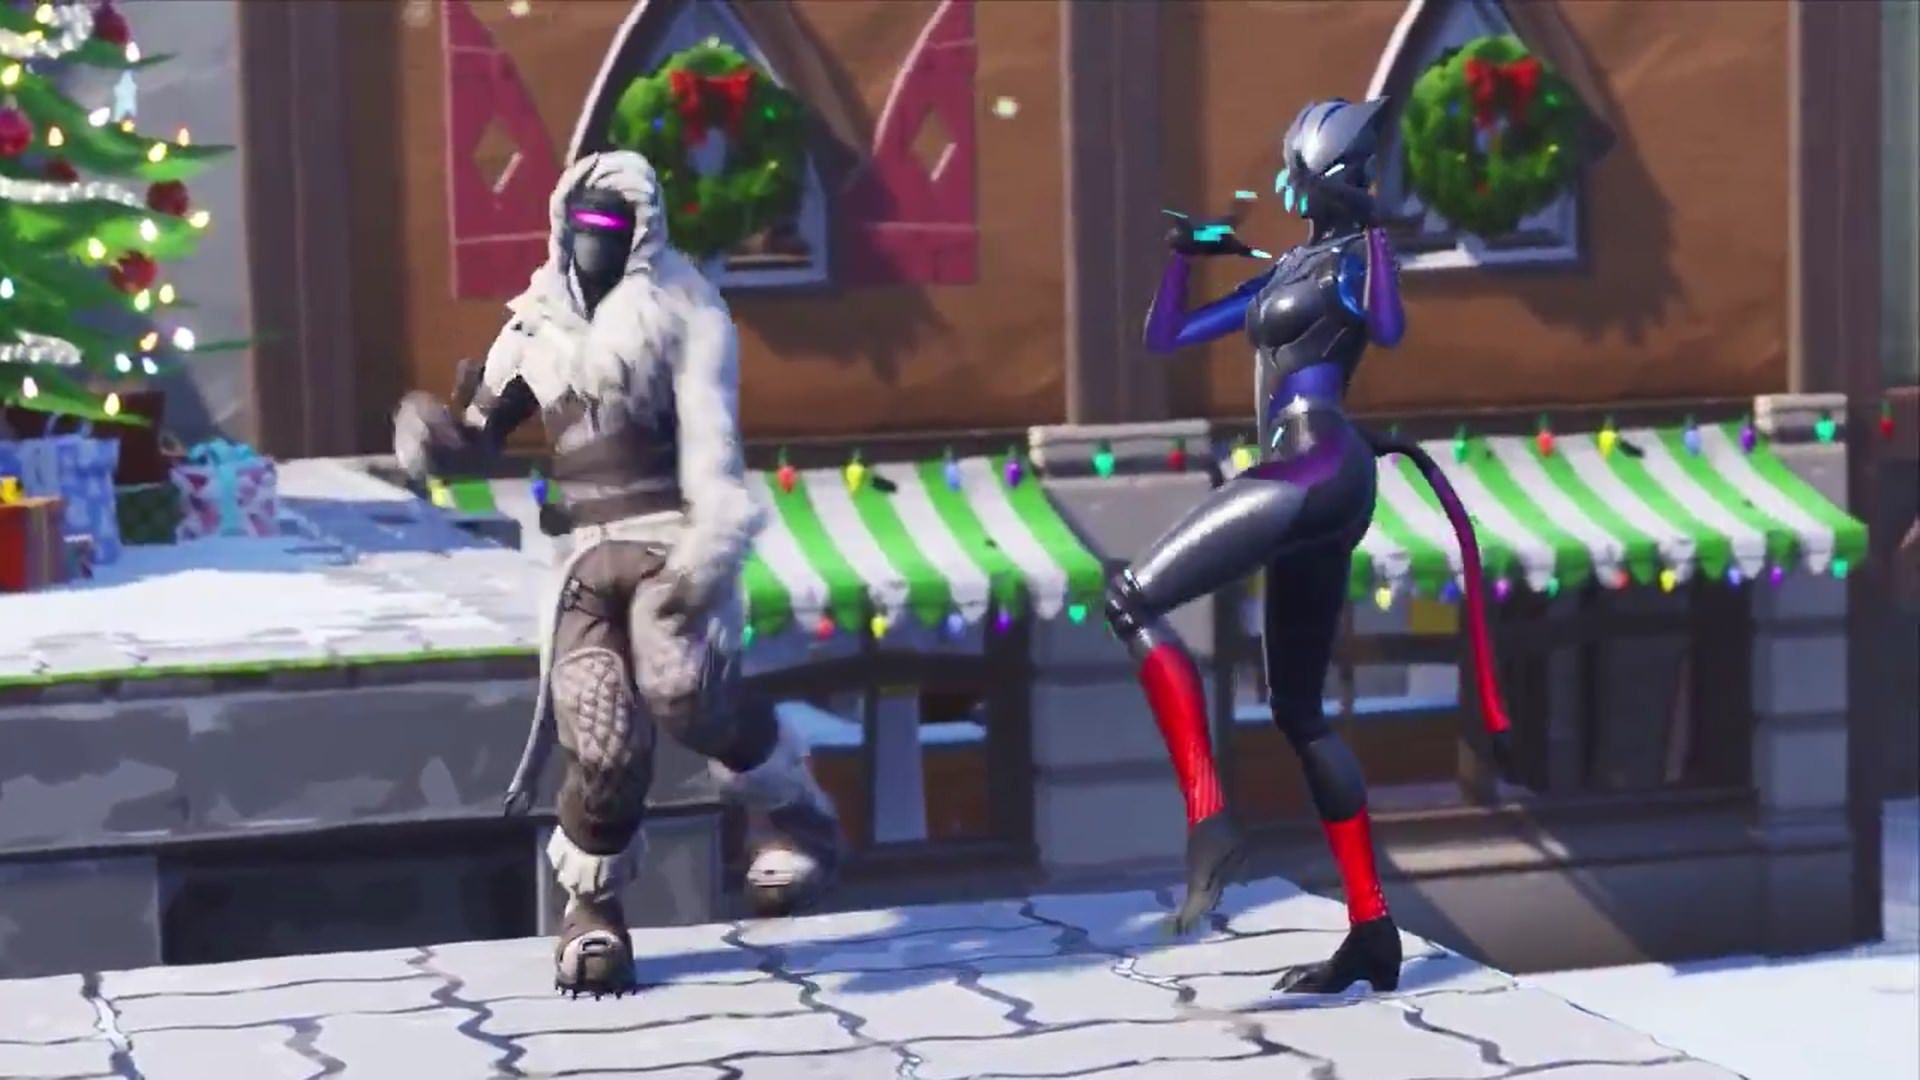 Fortnite Season 7 Battle Pass Trailer Leaked Early: Planes, Weapon/Vehicle Skins, More